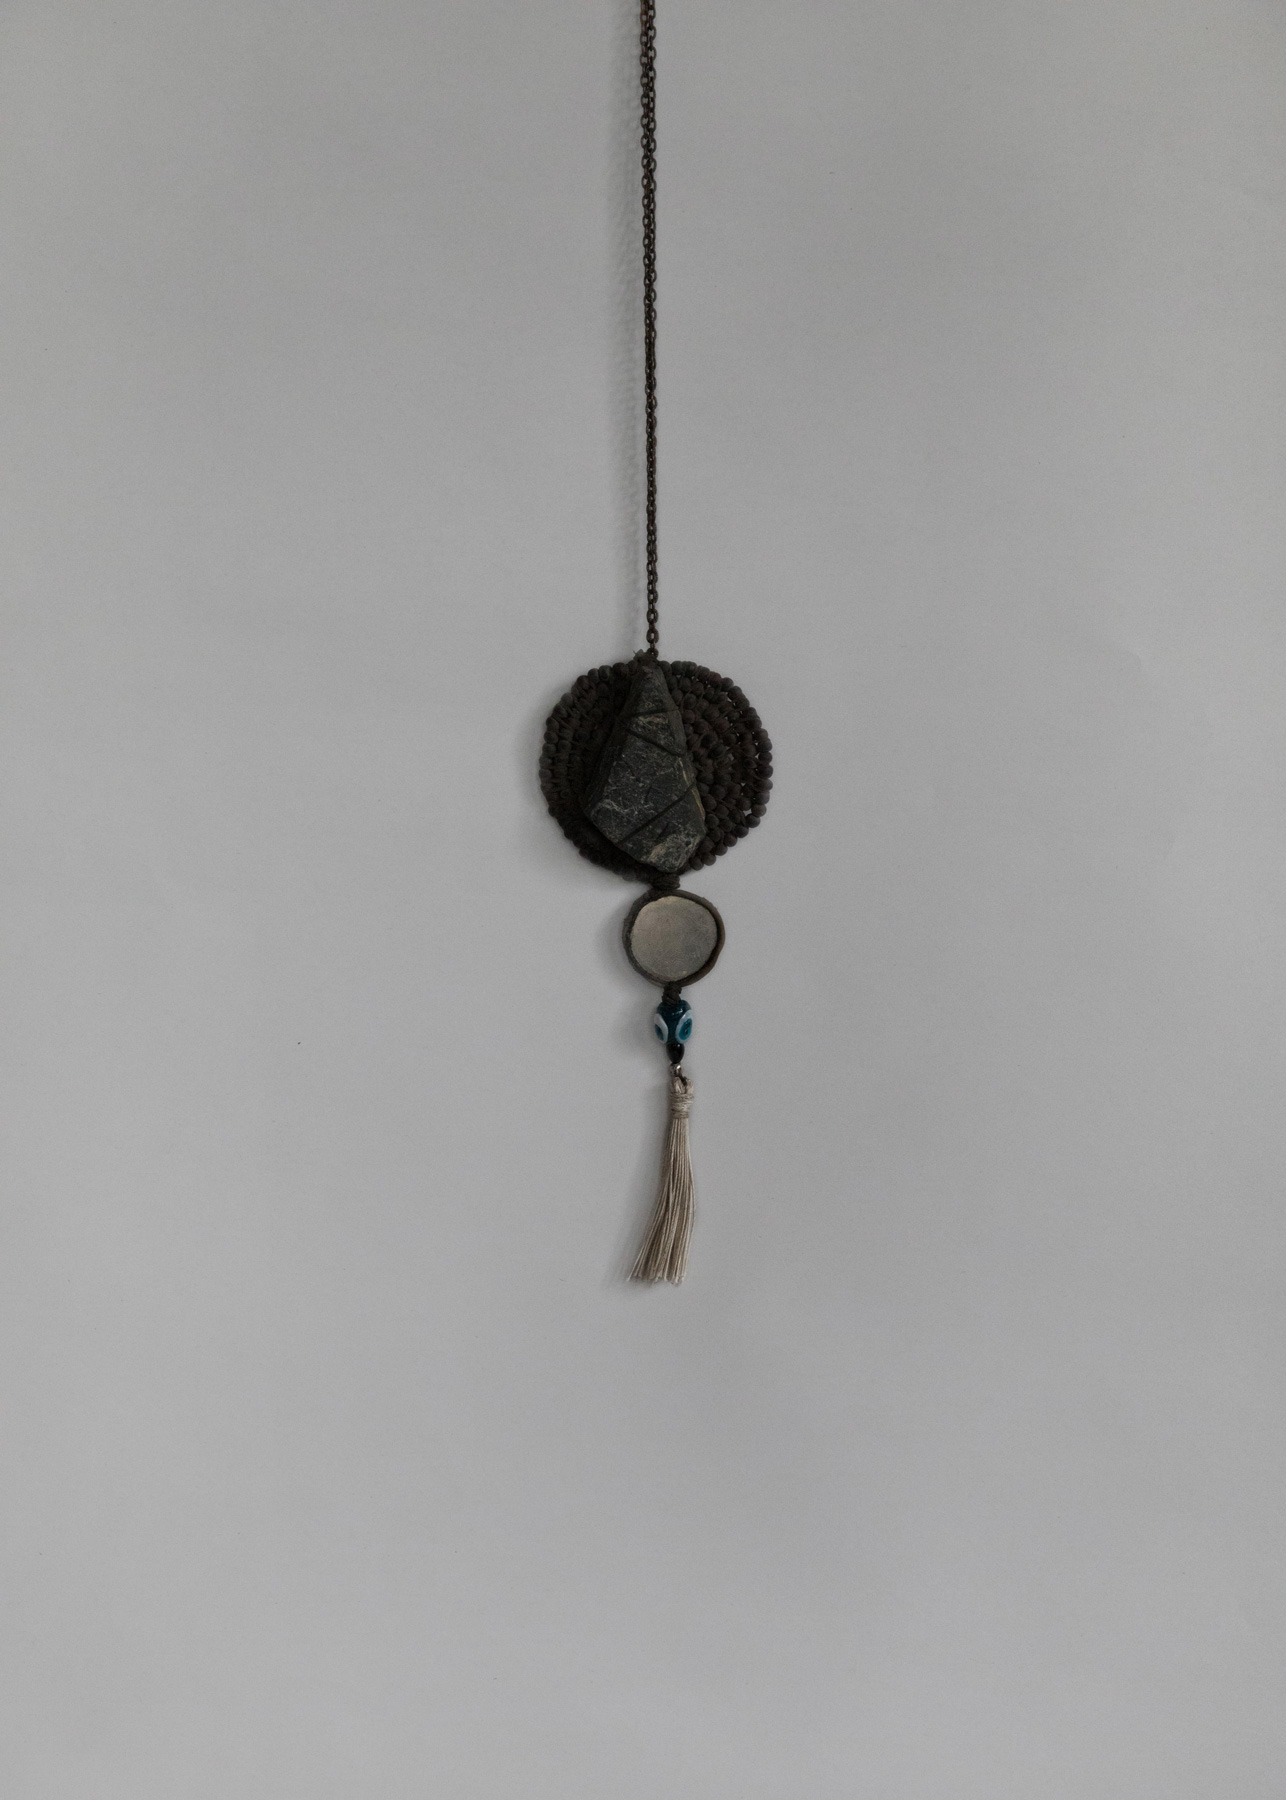 'Voting Pendant' made by Peachey and Mosig from rock, glass, thread, leather, copper, nickel, silver, and silk.